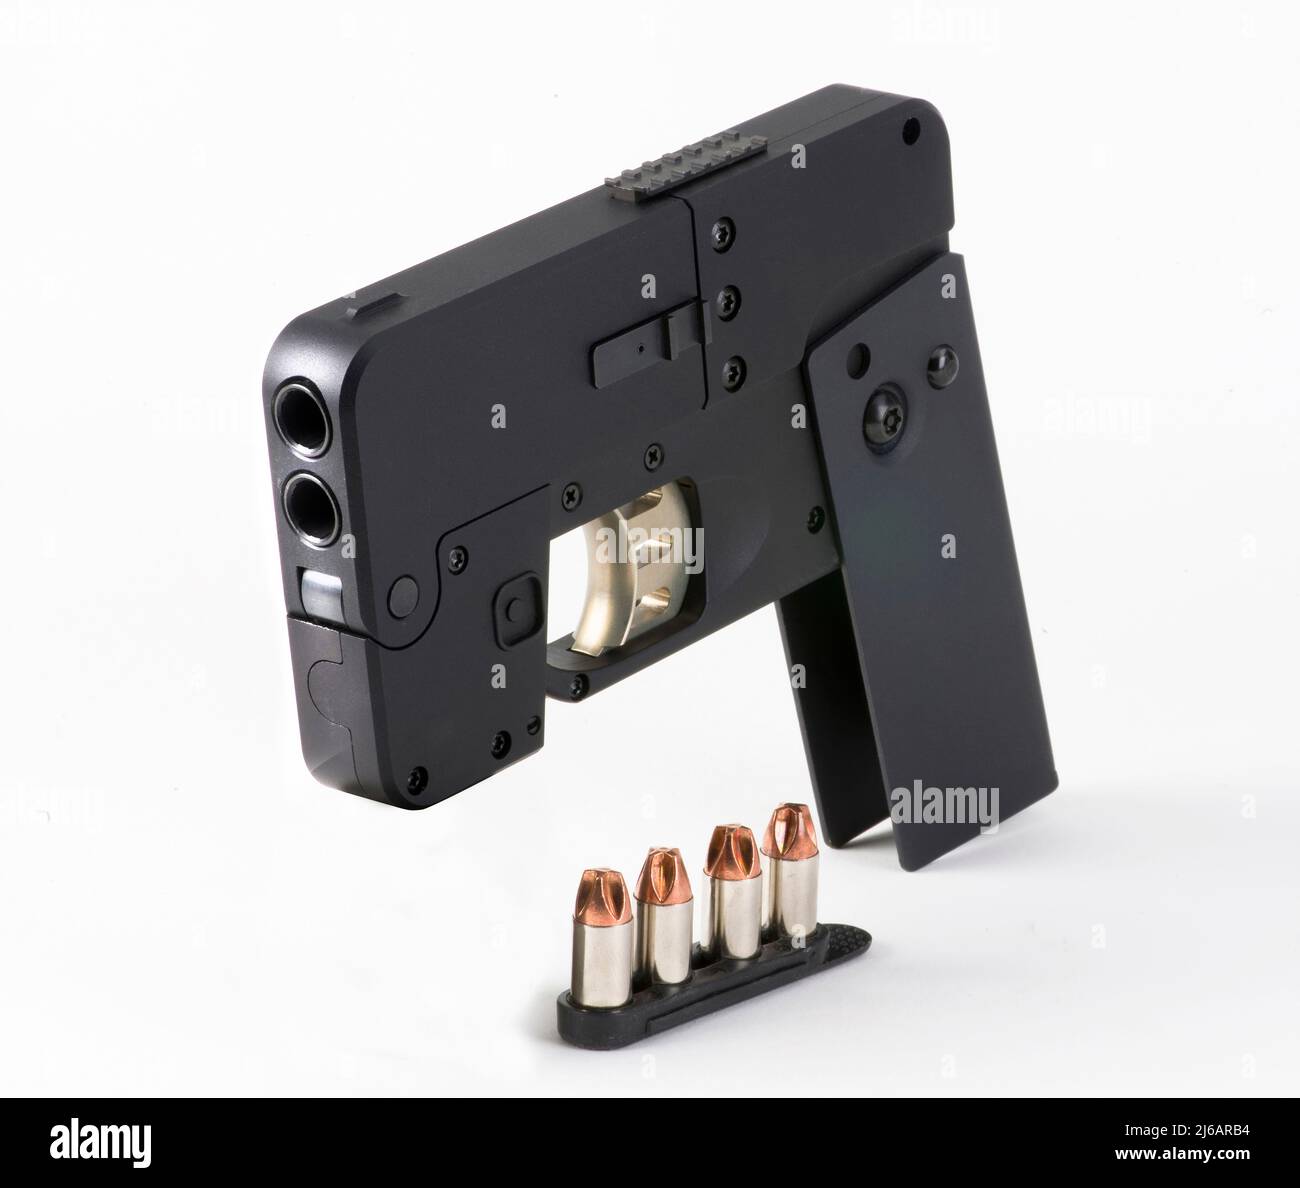 Smart phone 380ACP pistol that folds up and looks like a cell phone. Stock Photo